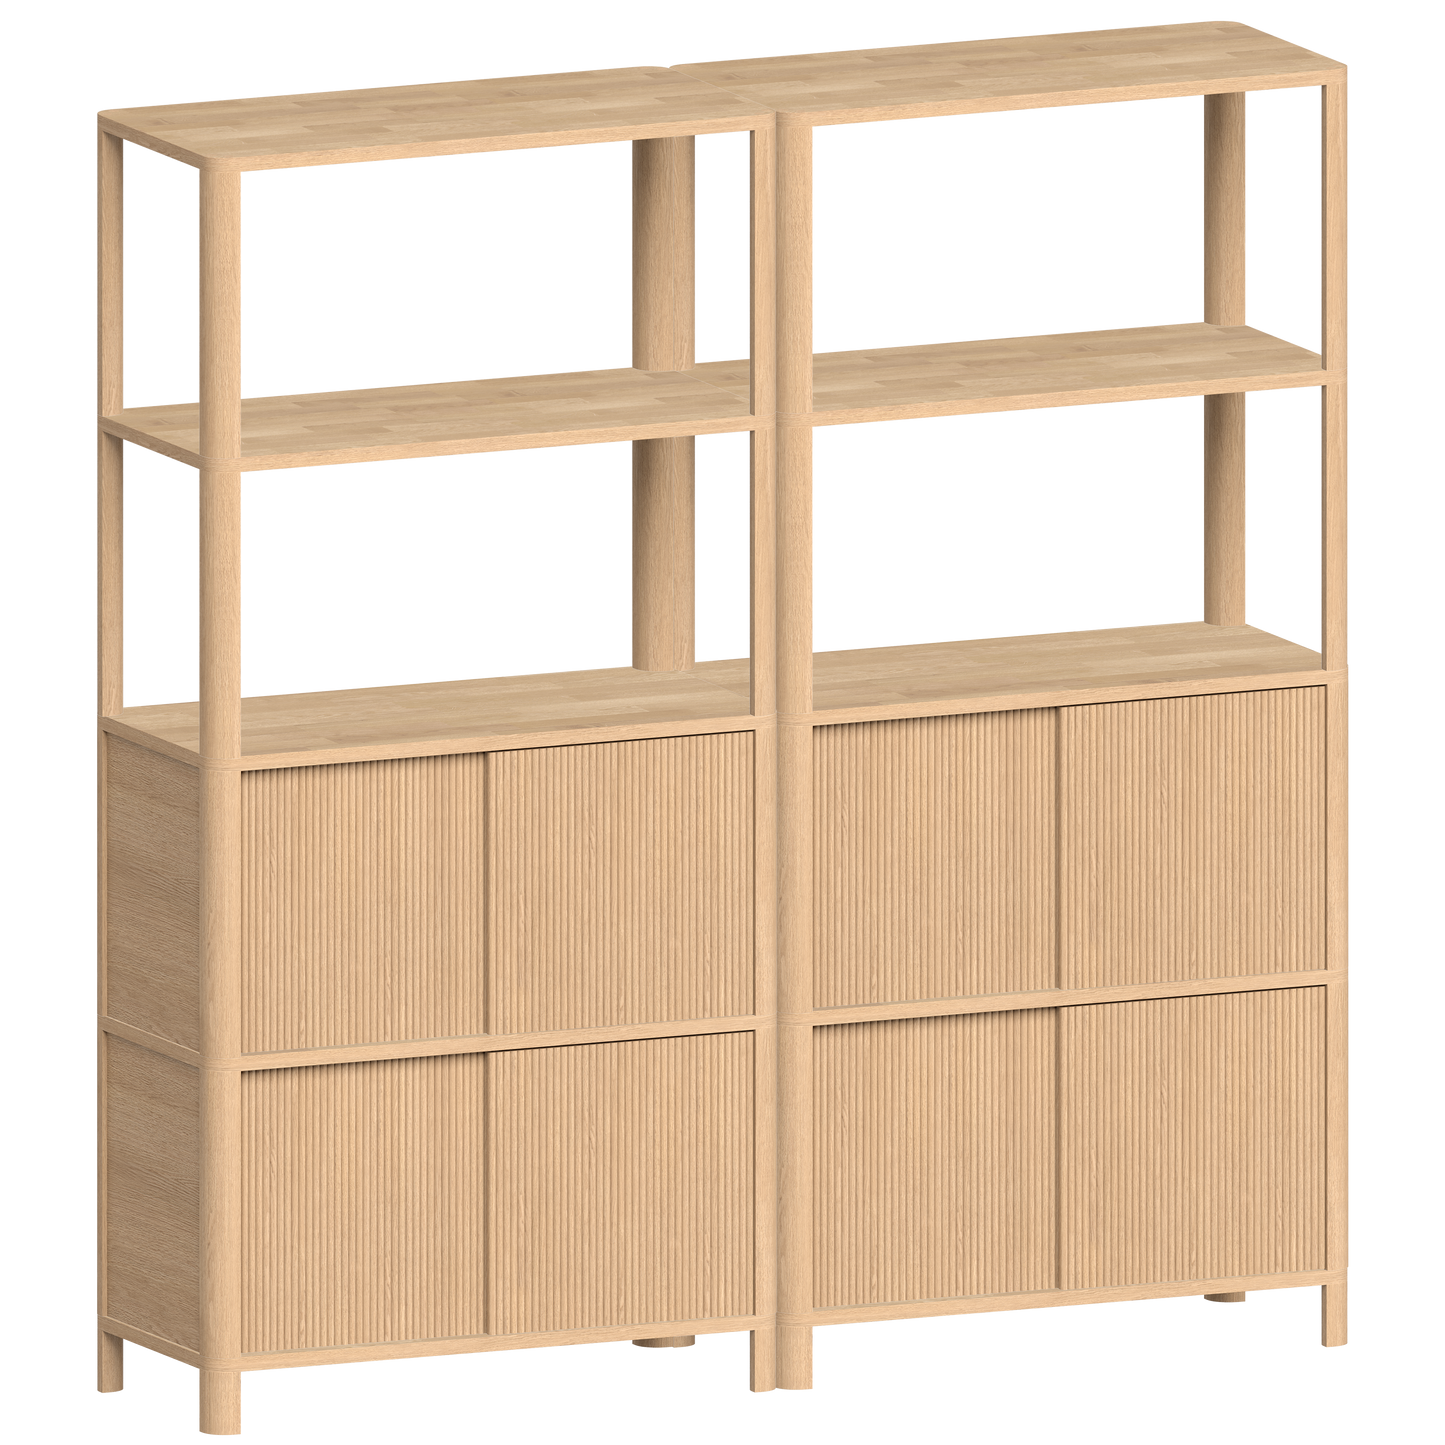 Storage & Cabinet | Wall Shelves | Home Decor | All In Line